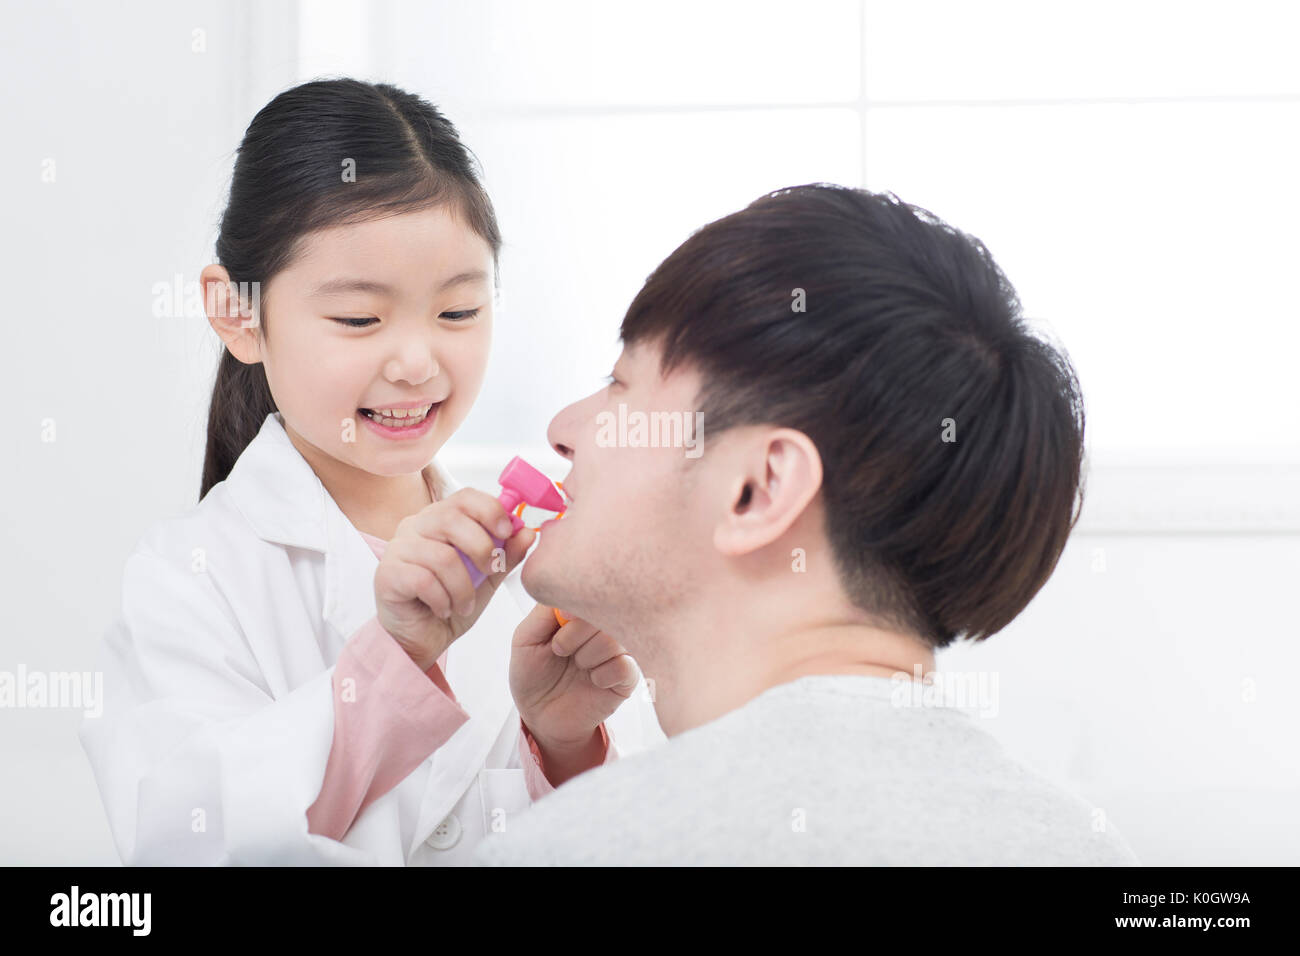 Smiling girl and her father playing hospital Stock Photo